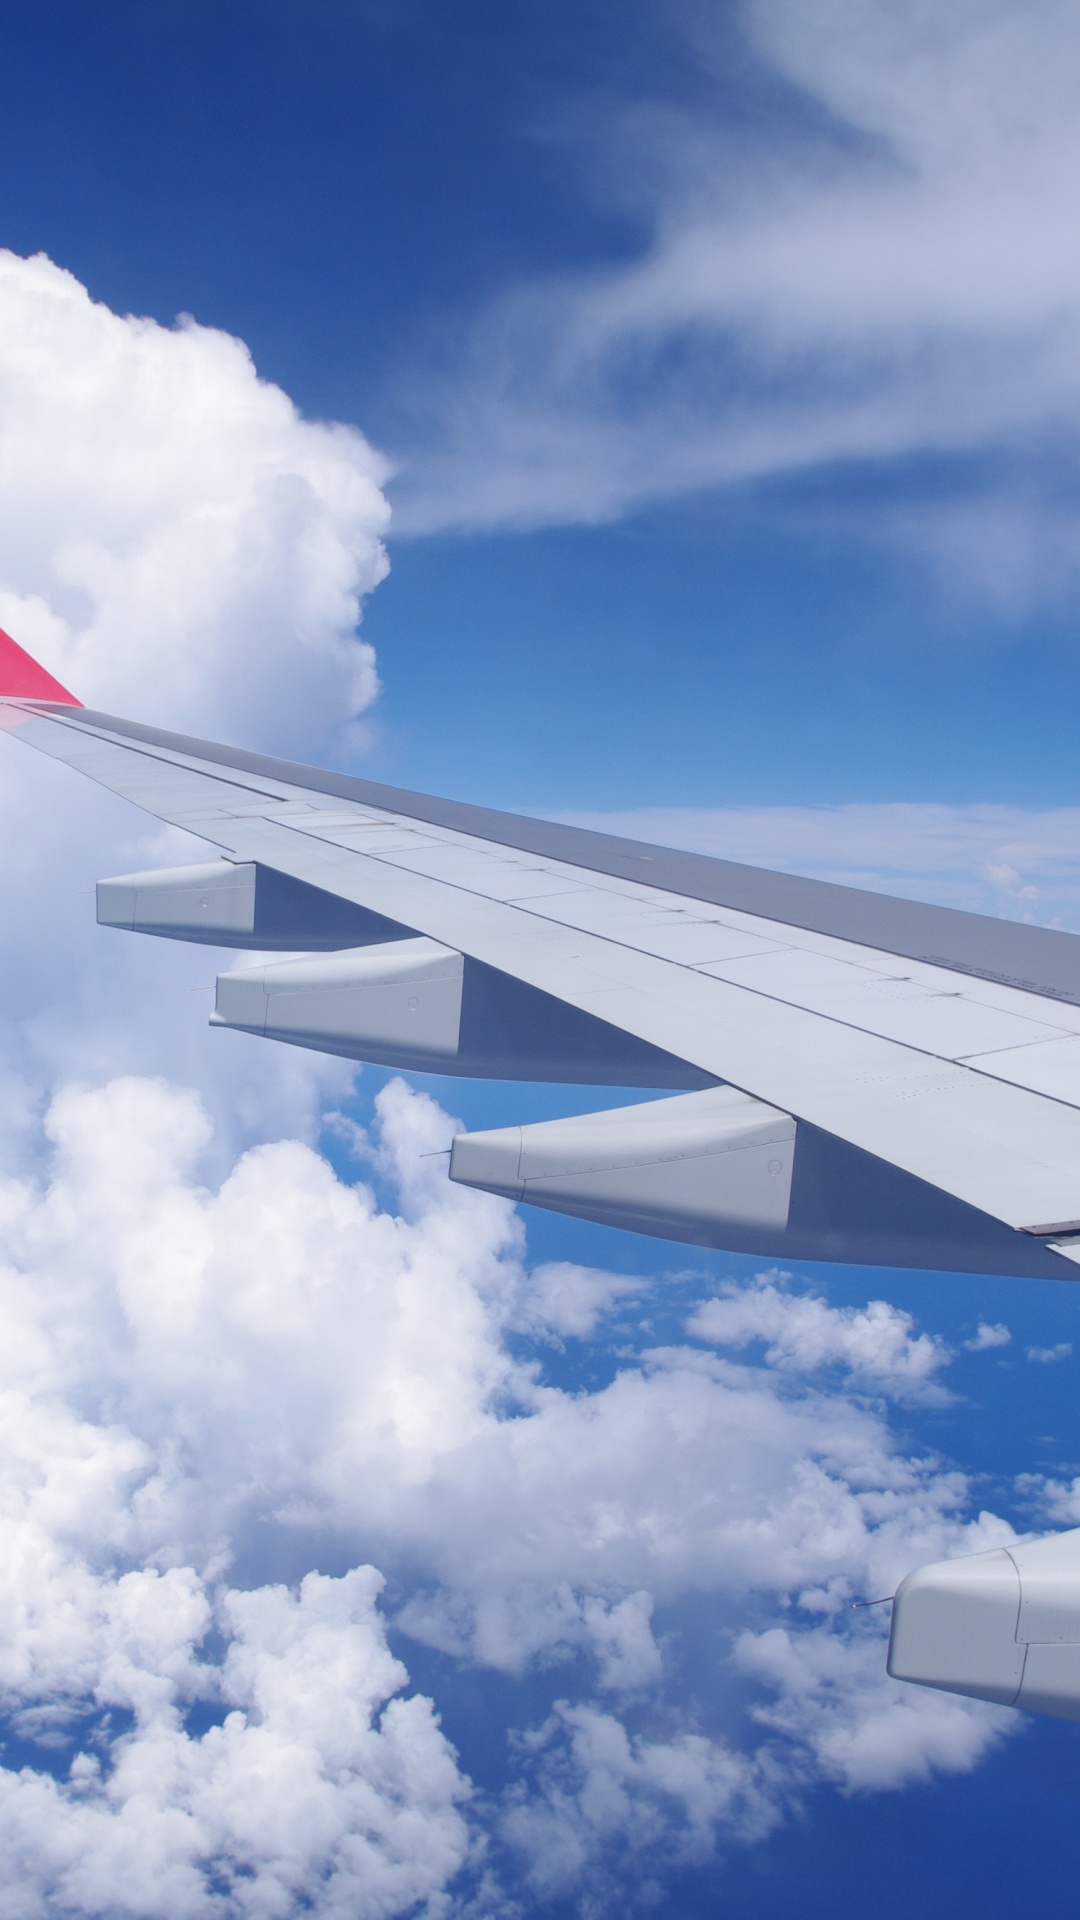 White and Red Airplane Wing Under Blue Sky and White Clouds During Daytime. Wallpaper in 1080x1920 Resolution